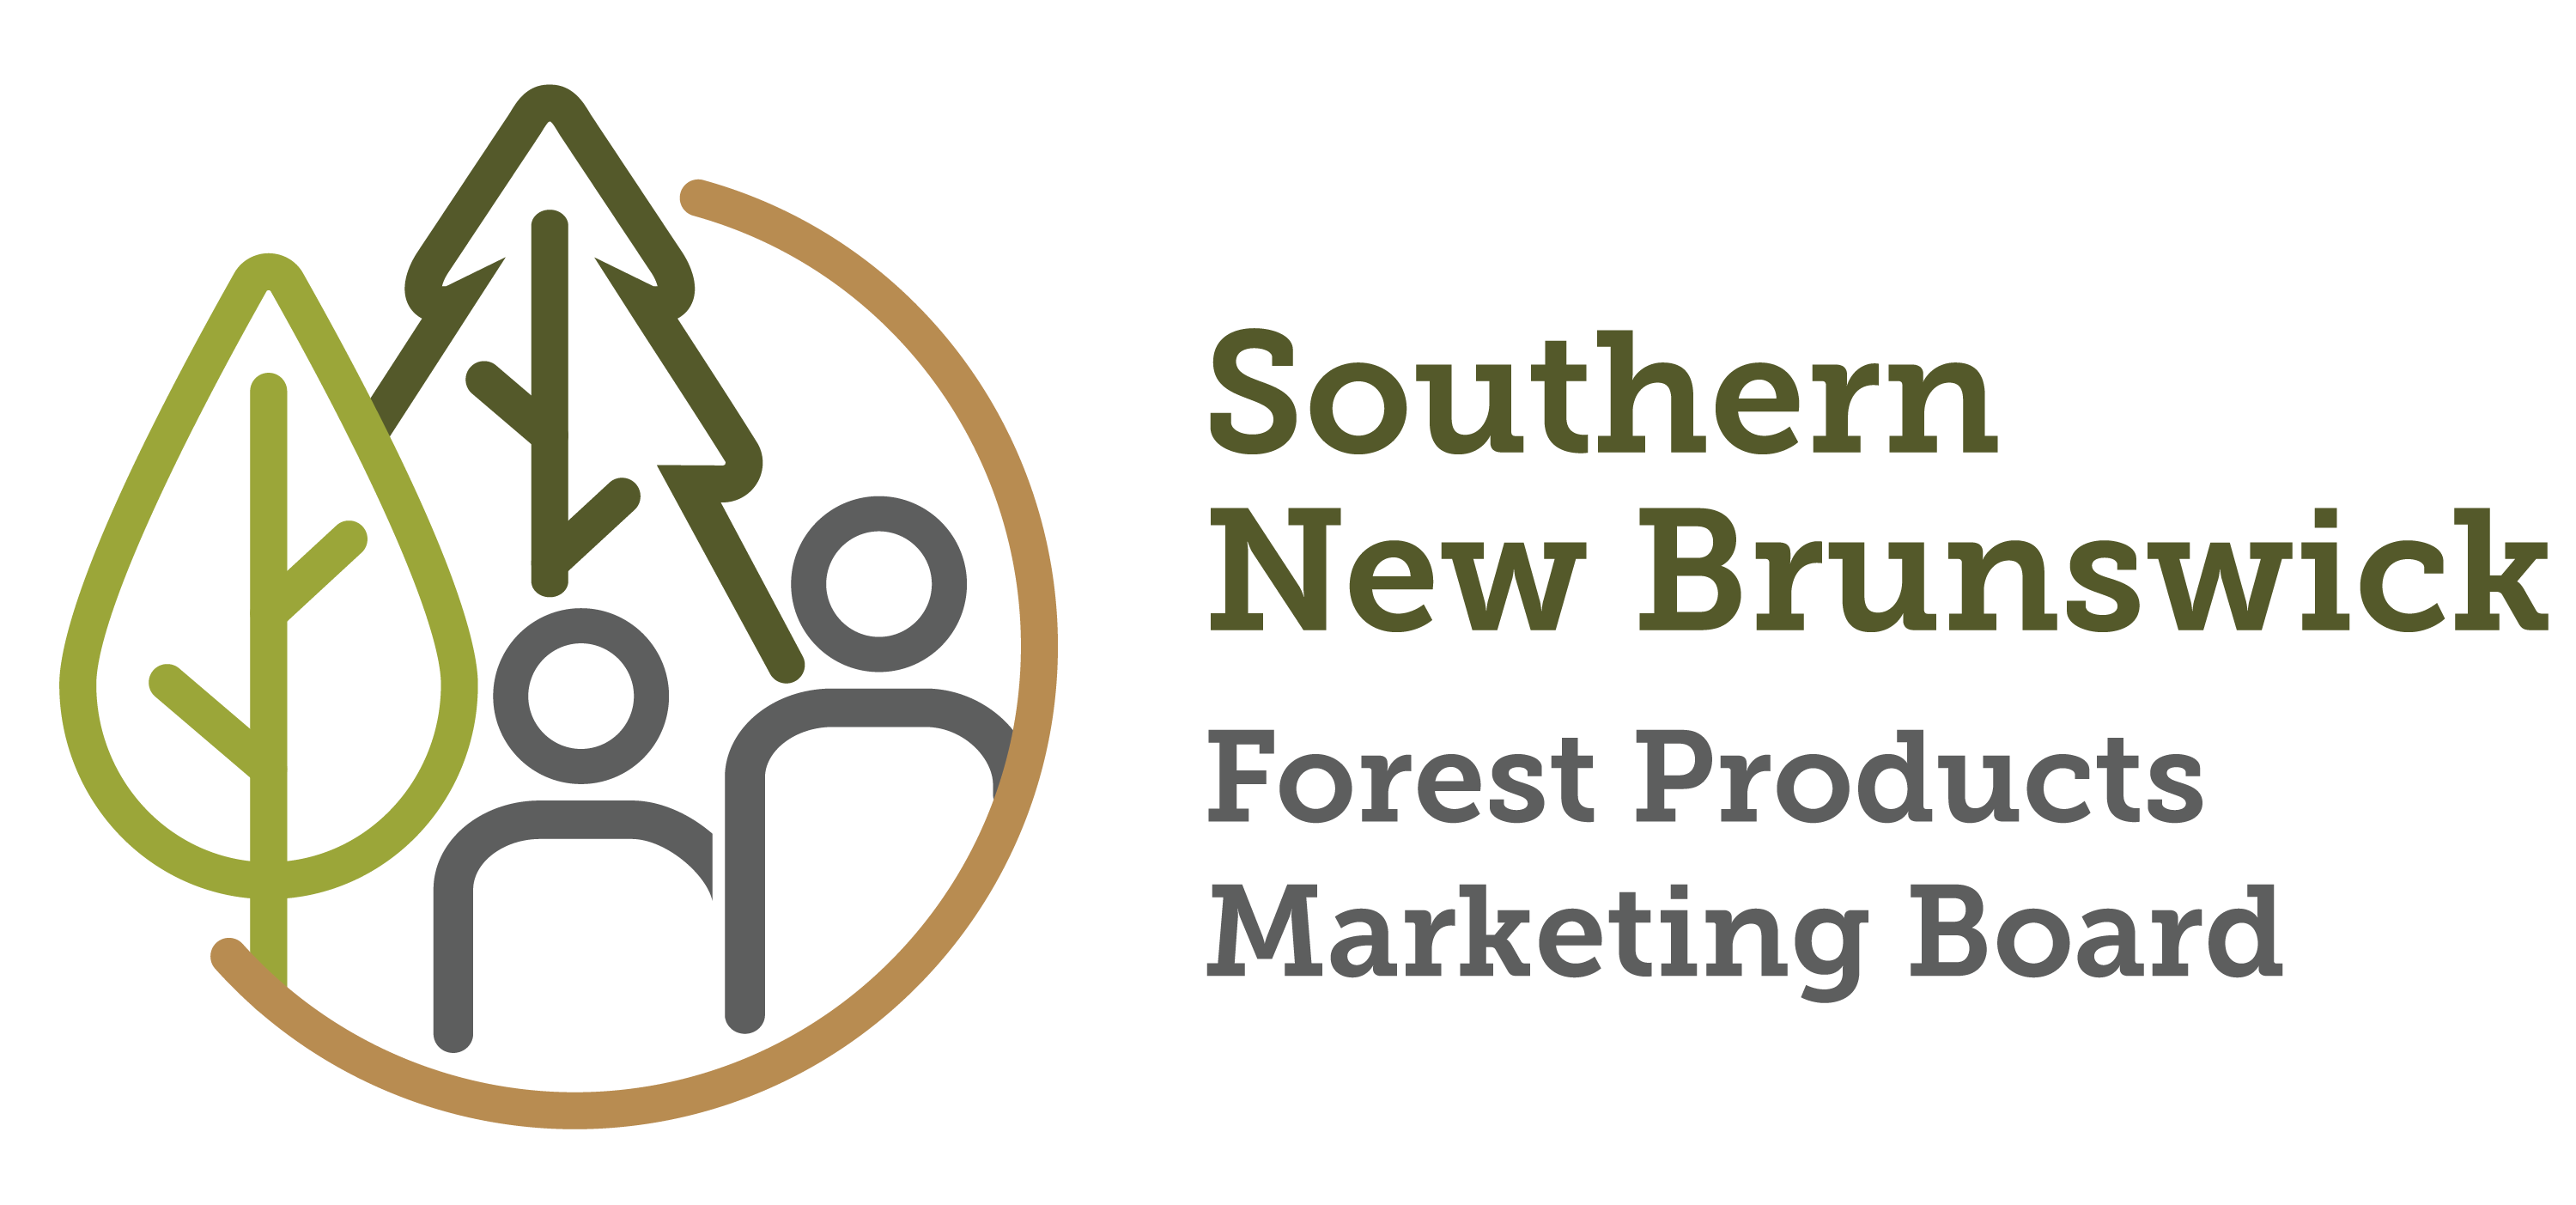 SNB Forest Products Marketing Board Logo